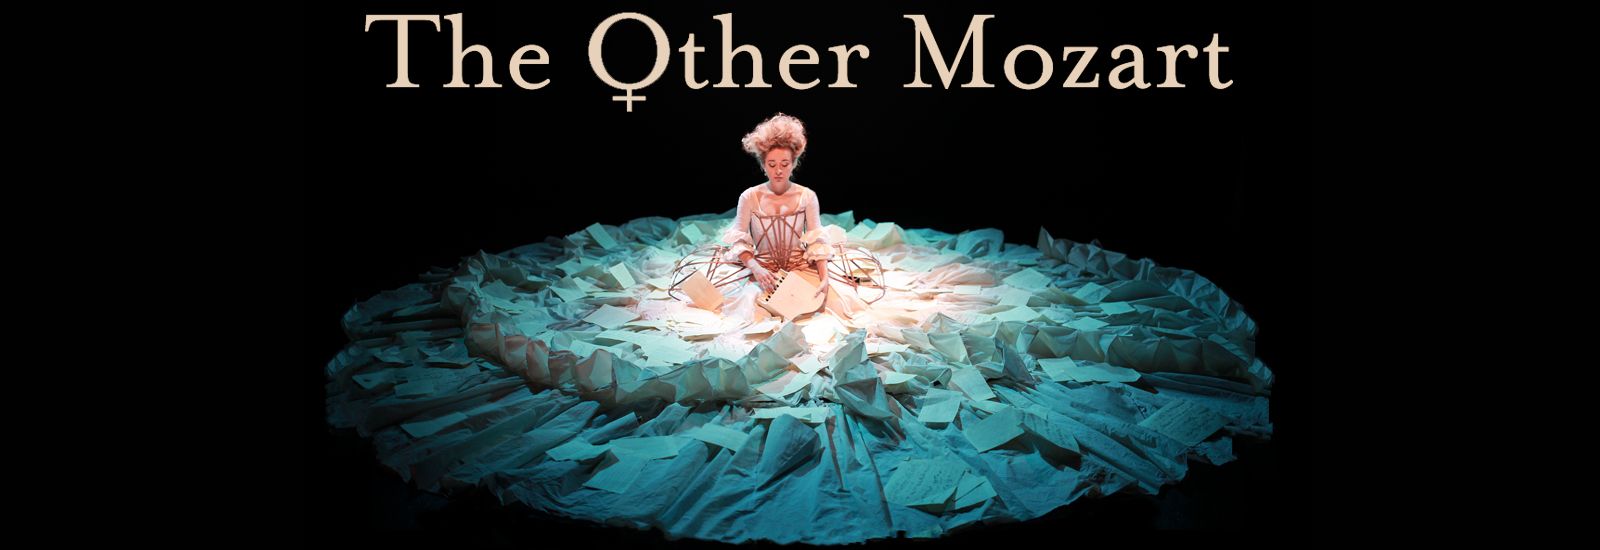 The Other Mozart_Title_Blue Dress_Banner